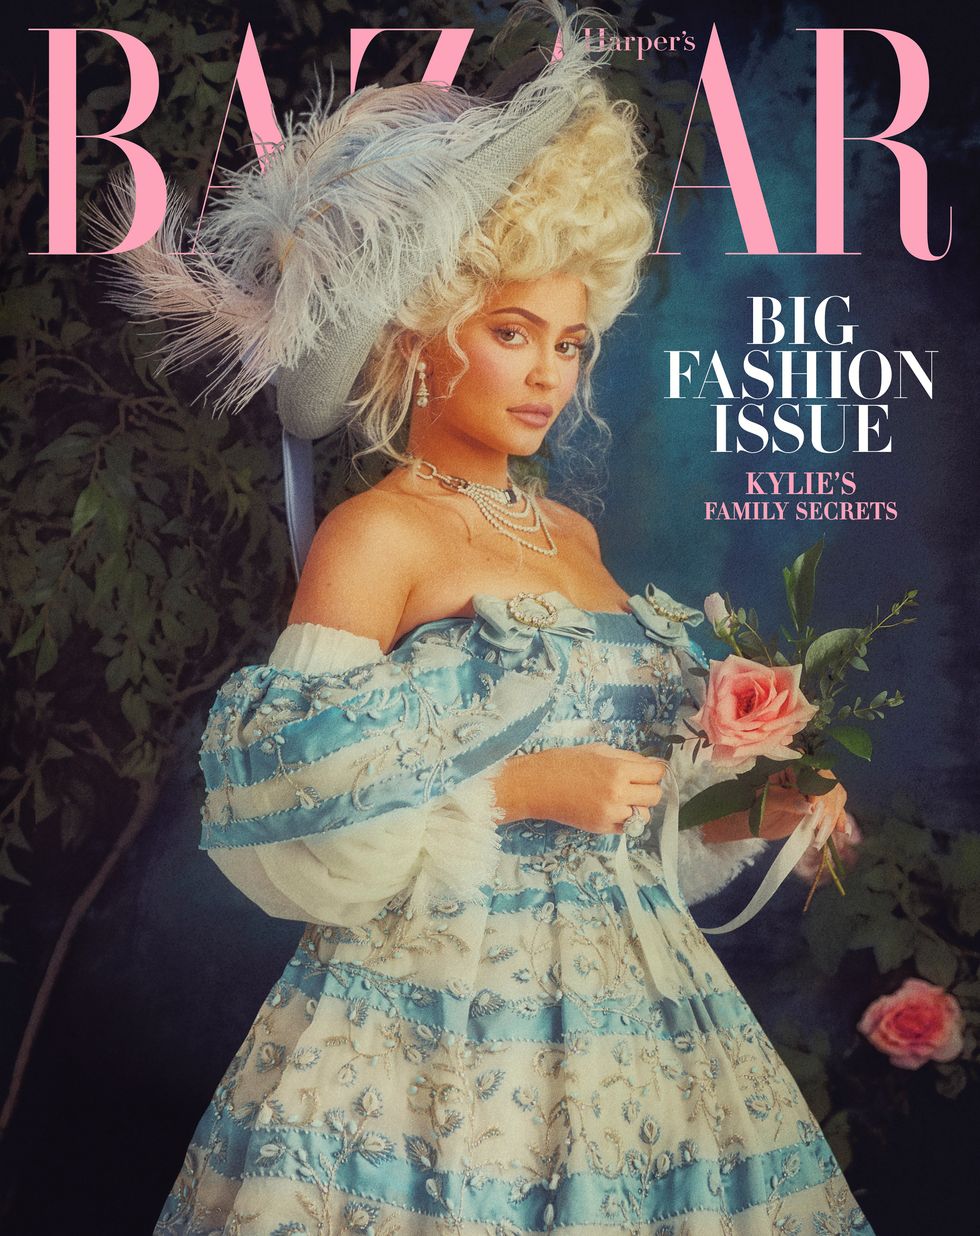 Must Read: Kylie Jenner Covers 'Harper's Bazaar', Gucci to Take